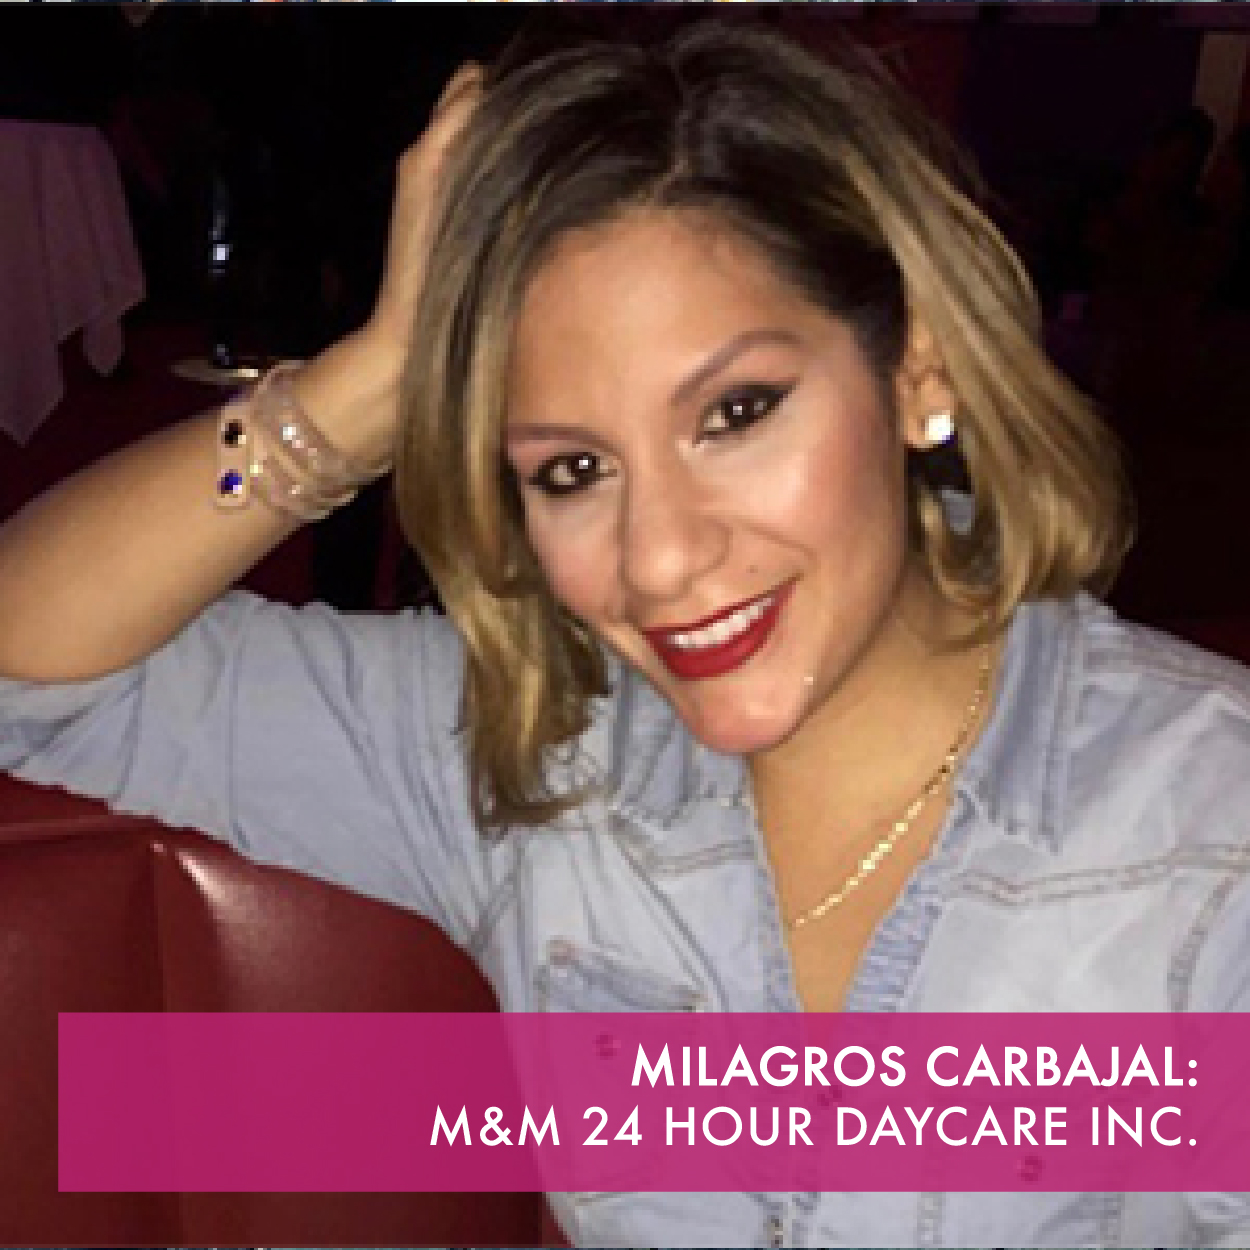 M &amp; M 24HR Daycare Inc. is a licensed at home daycare that offers extended hours. The company’s mission is to provide a safe, clean and educational environment to children.